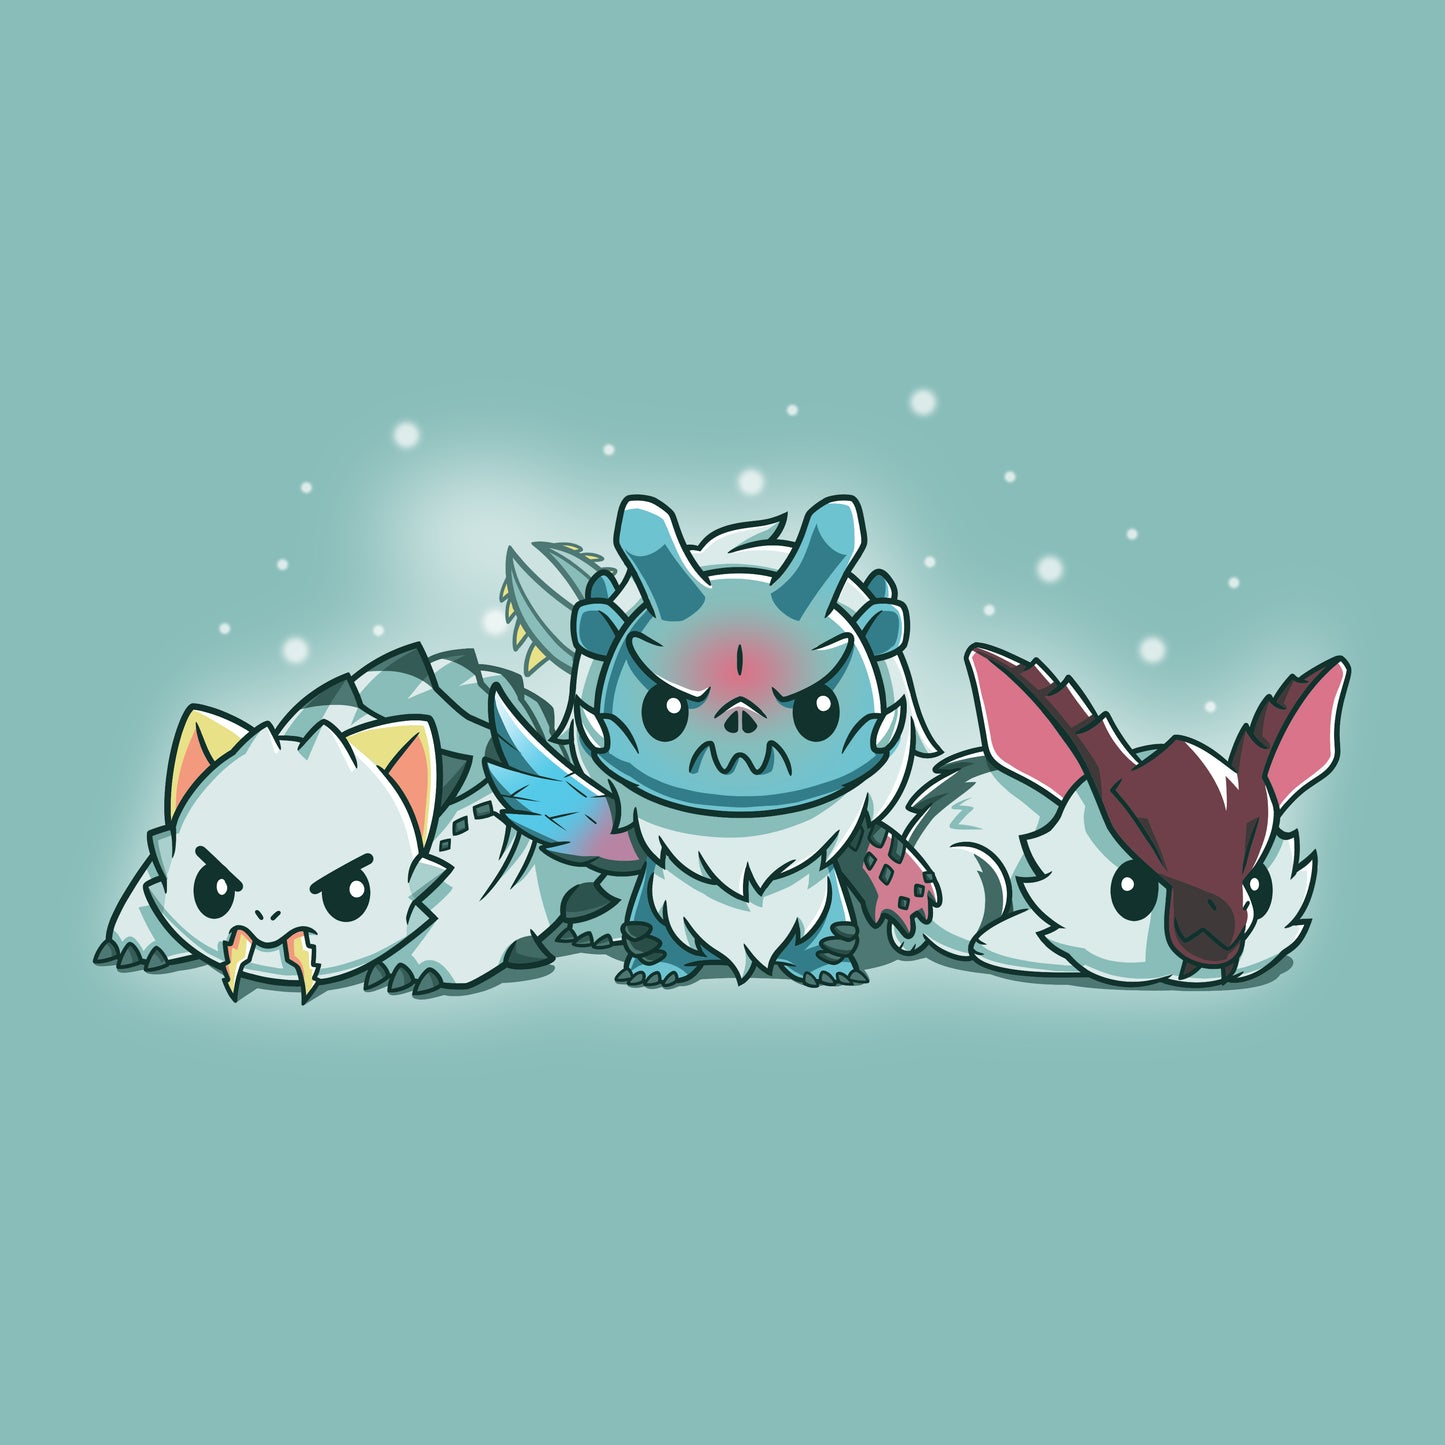 A group of Ice Monsters, officially licensed cartoon animals, laying down on a blue background. (Brand: Monster Hunter)